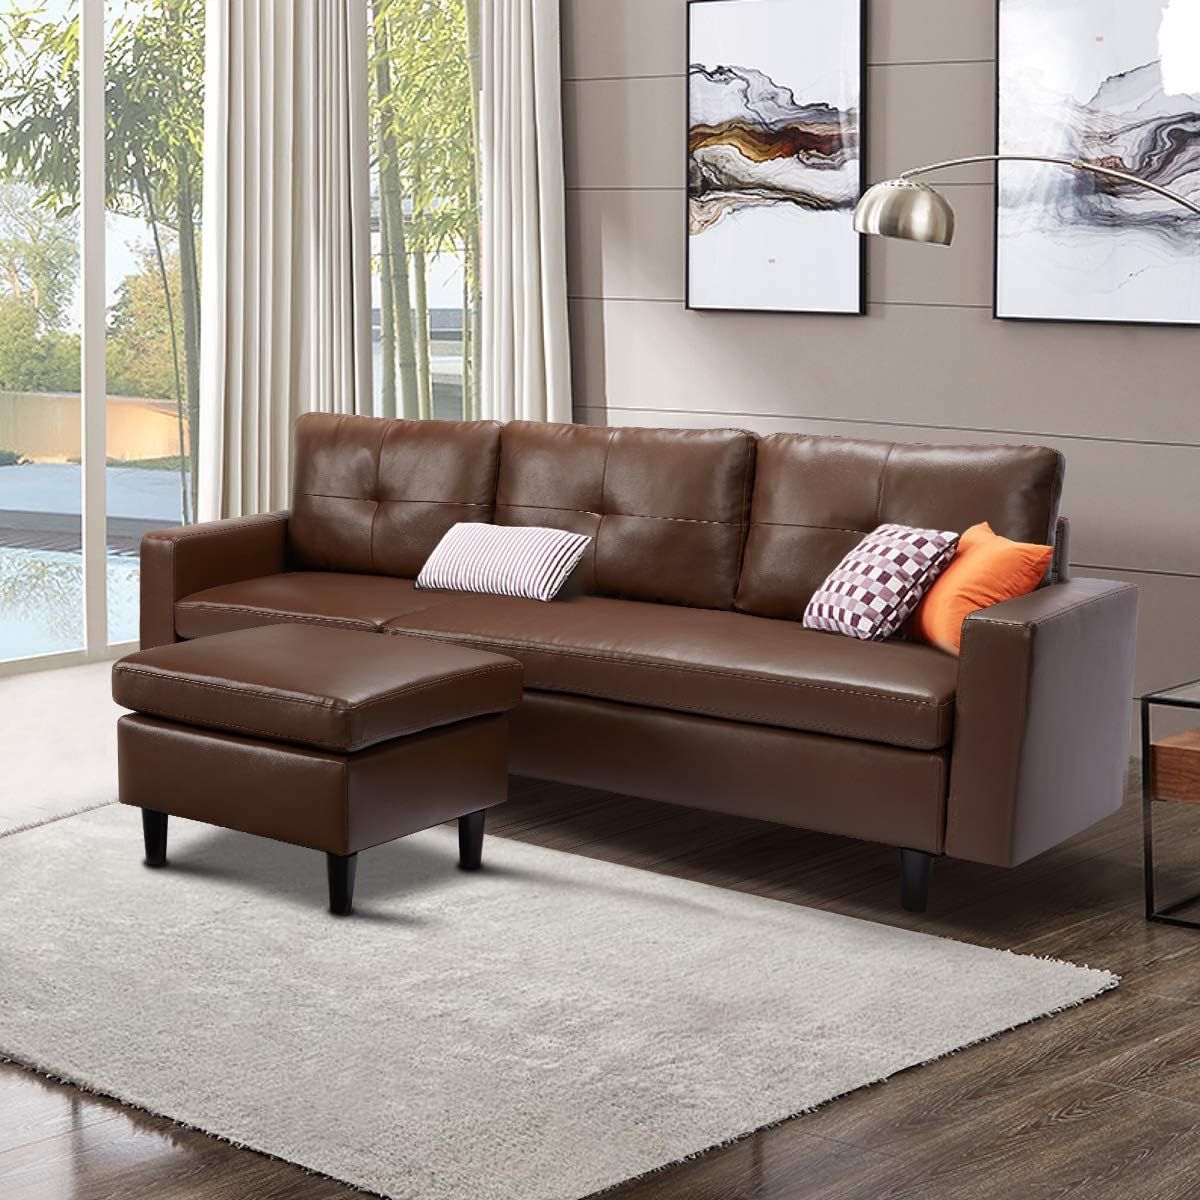 2018 Esright Faux Leather Sectional Sofa Convertible Couch Brown Leather L Throughout Faux Leather Sofas In Dark Brown (View 8 of 15)